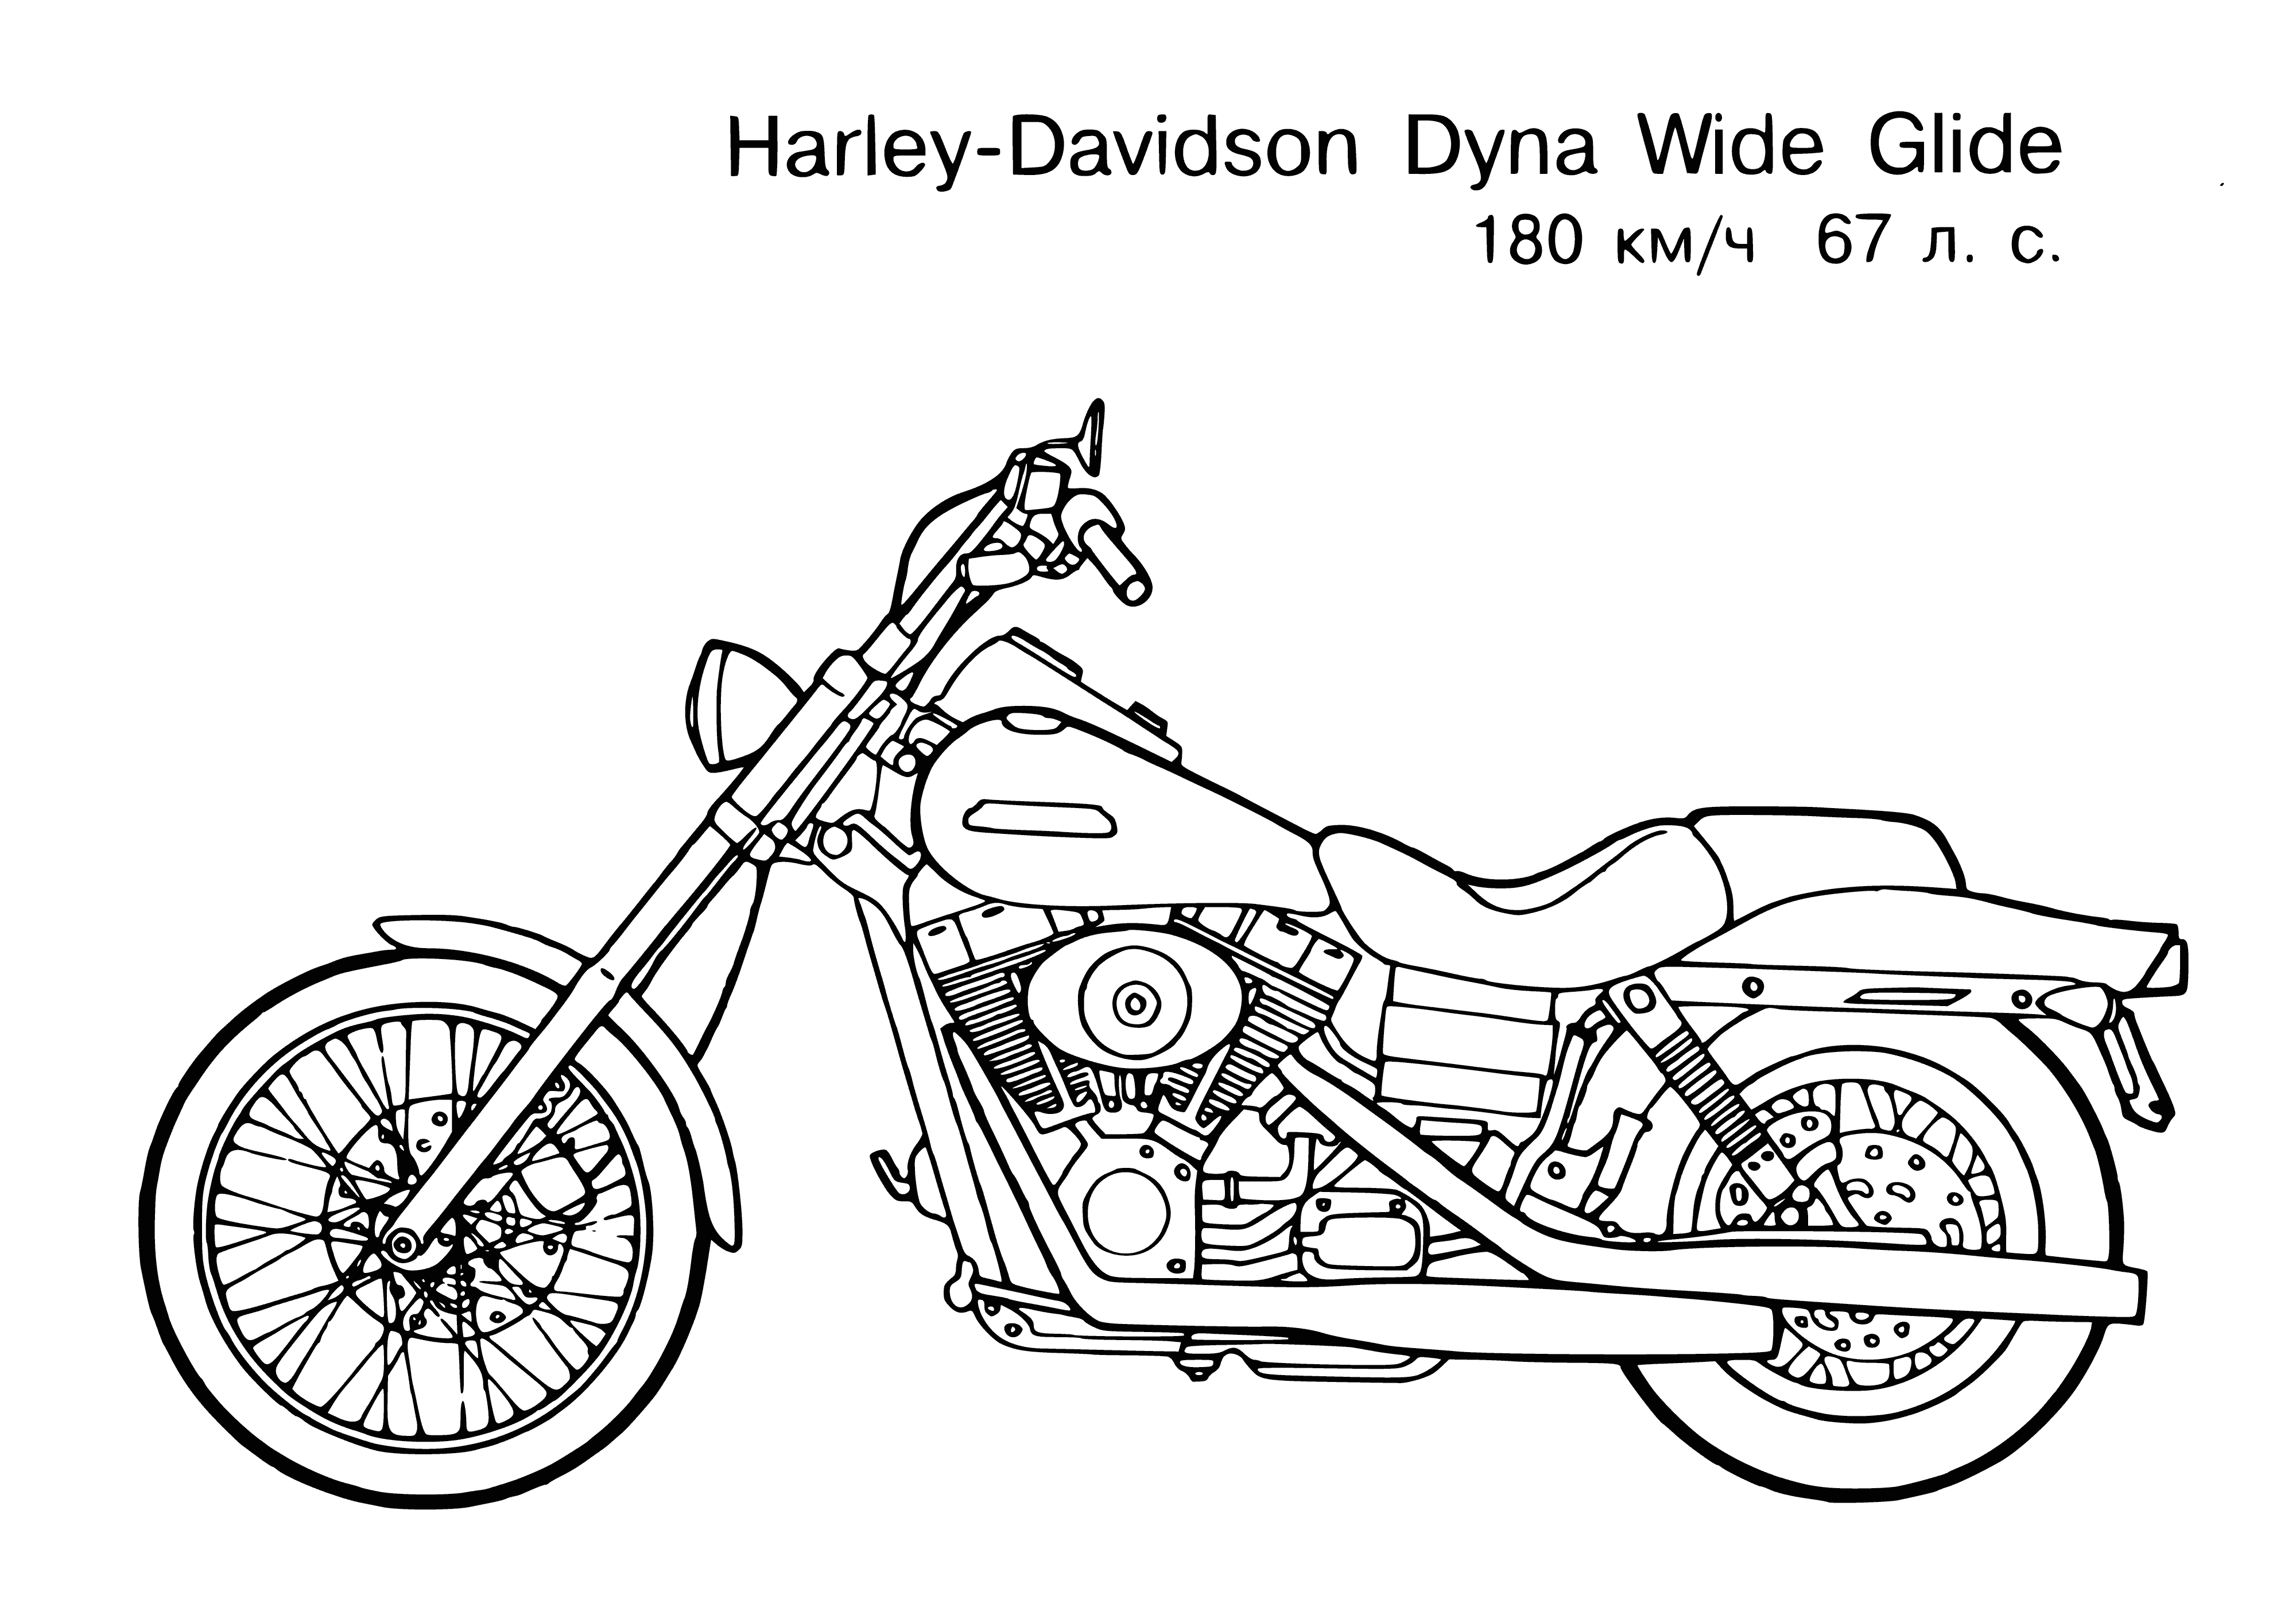 coloring page: A man & woman on a motorbike, both wearing helmets, taking in a beautiful view of the mountains.